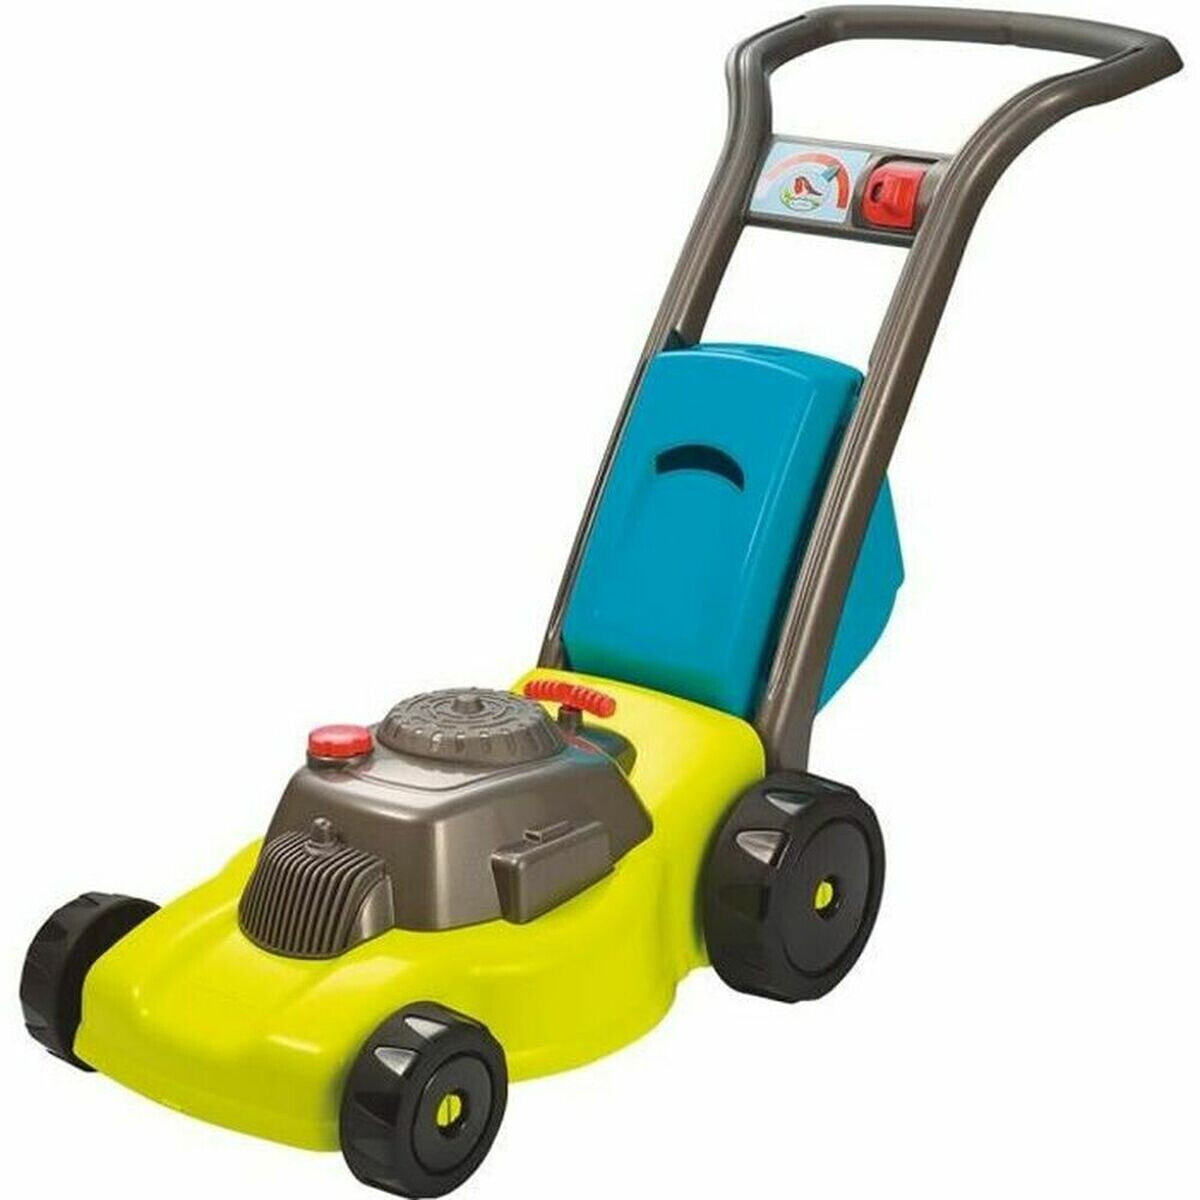 Toy lawnmower Ecoiffier 4280